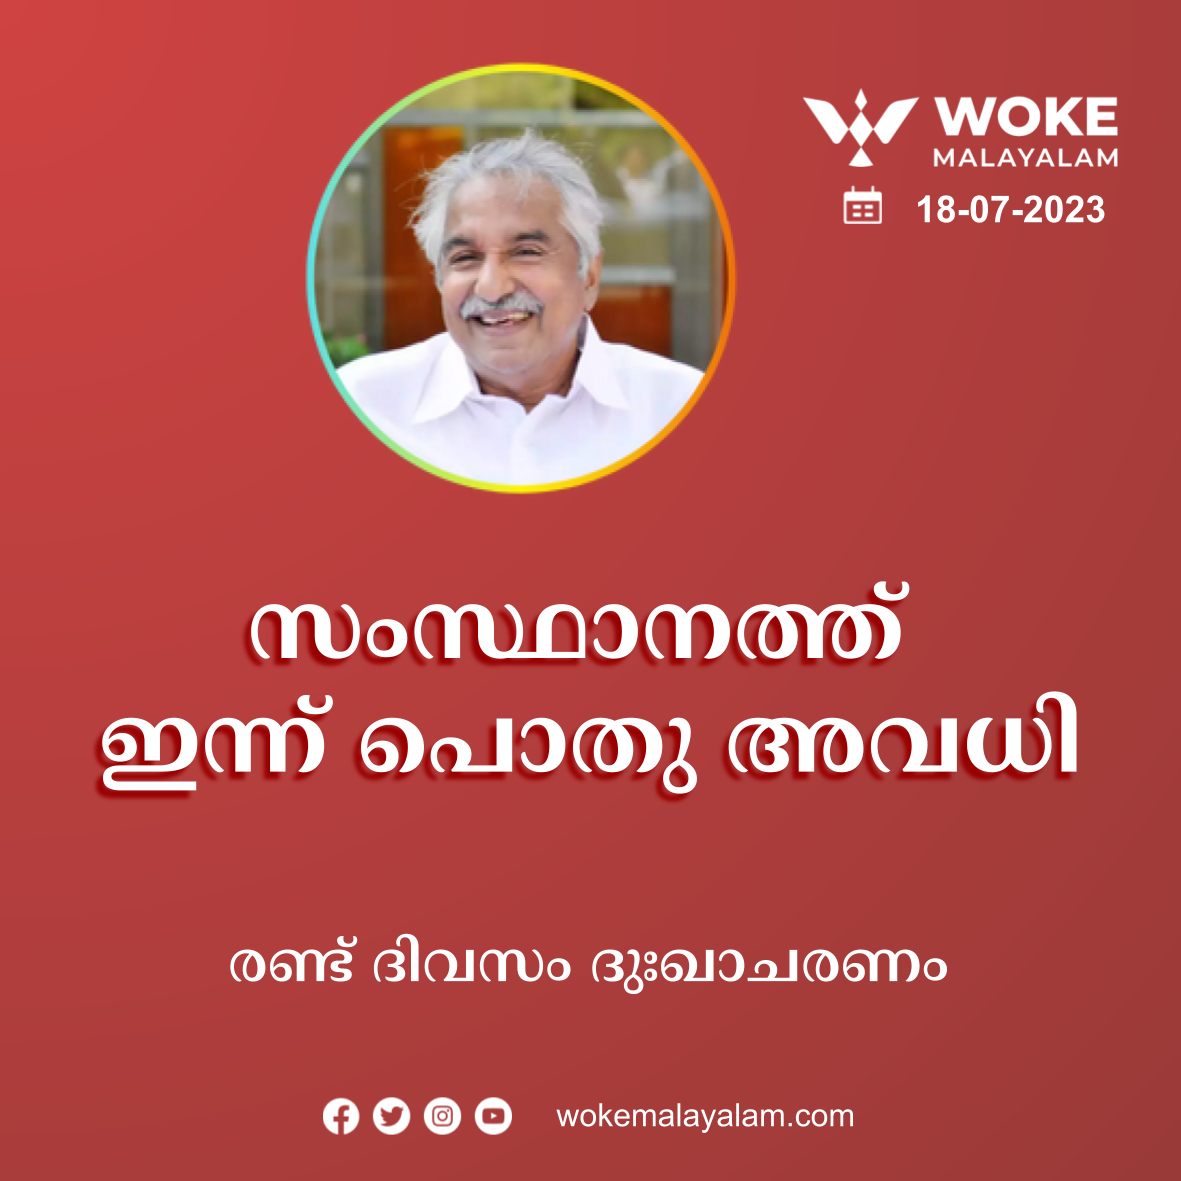 kerala-government-declares-two-day-mourning-in-state-as-a-mark-of-respect-to-oommen-chandy.